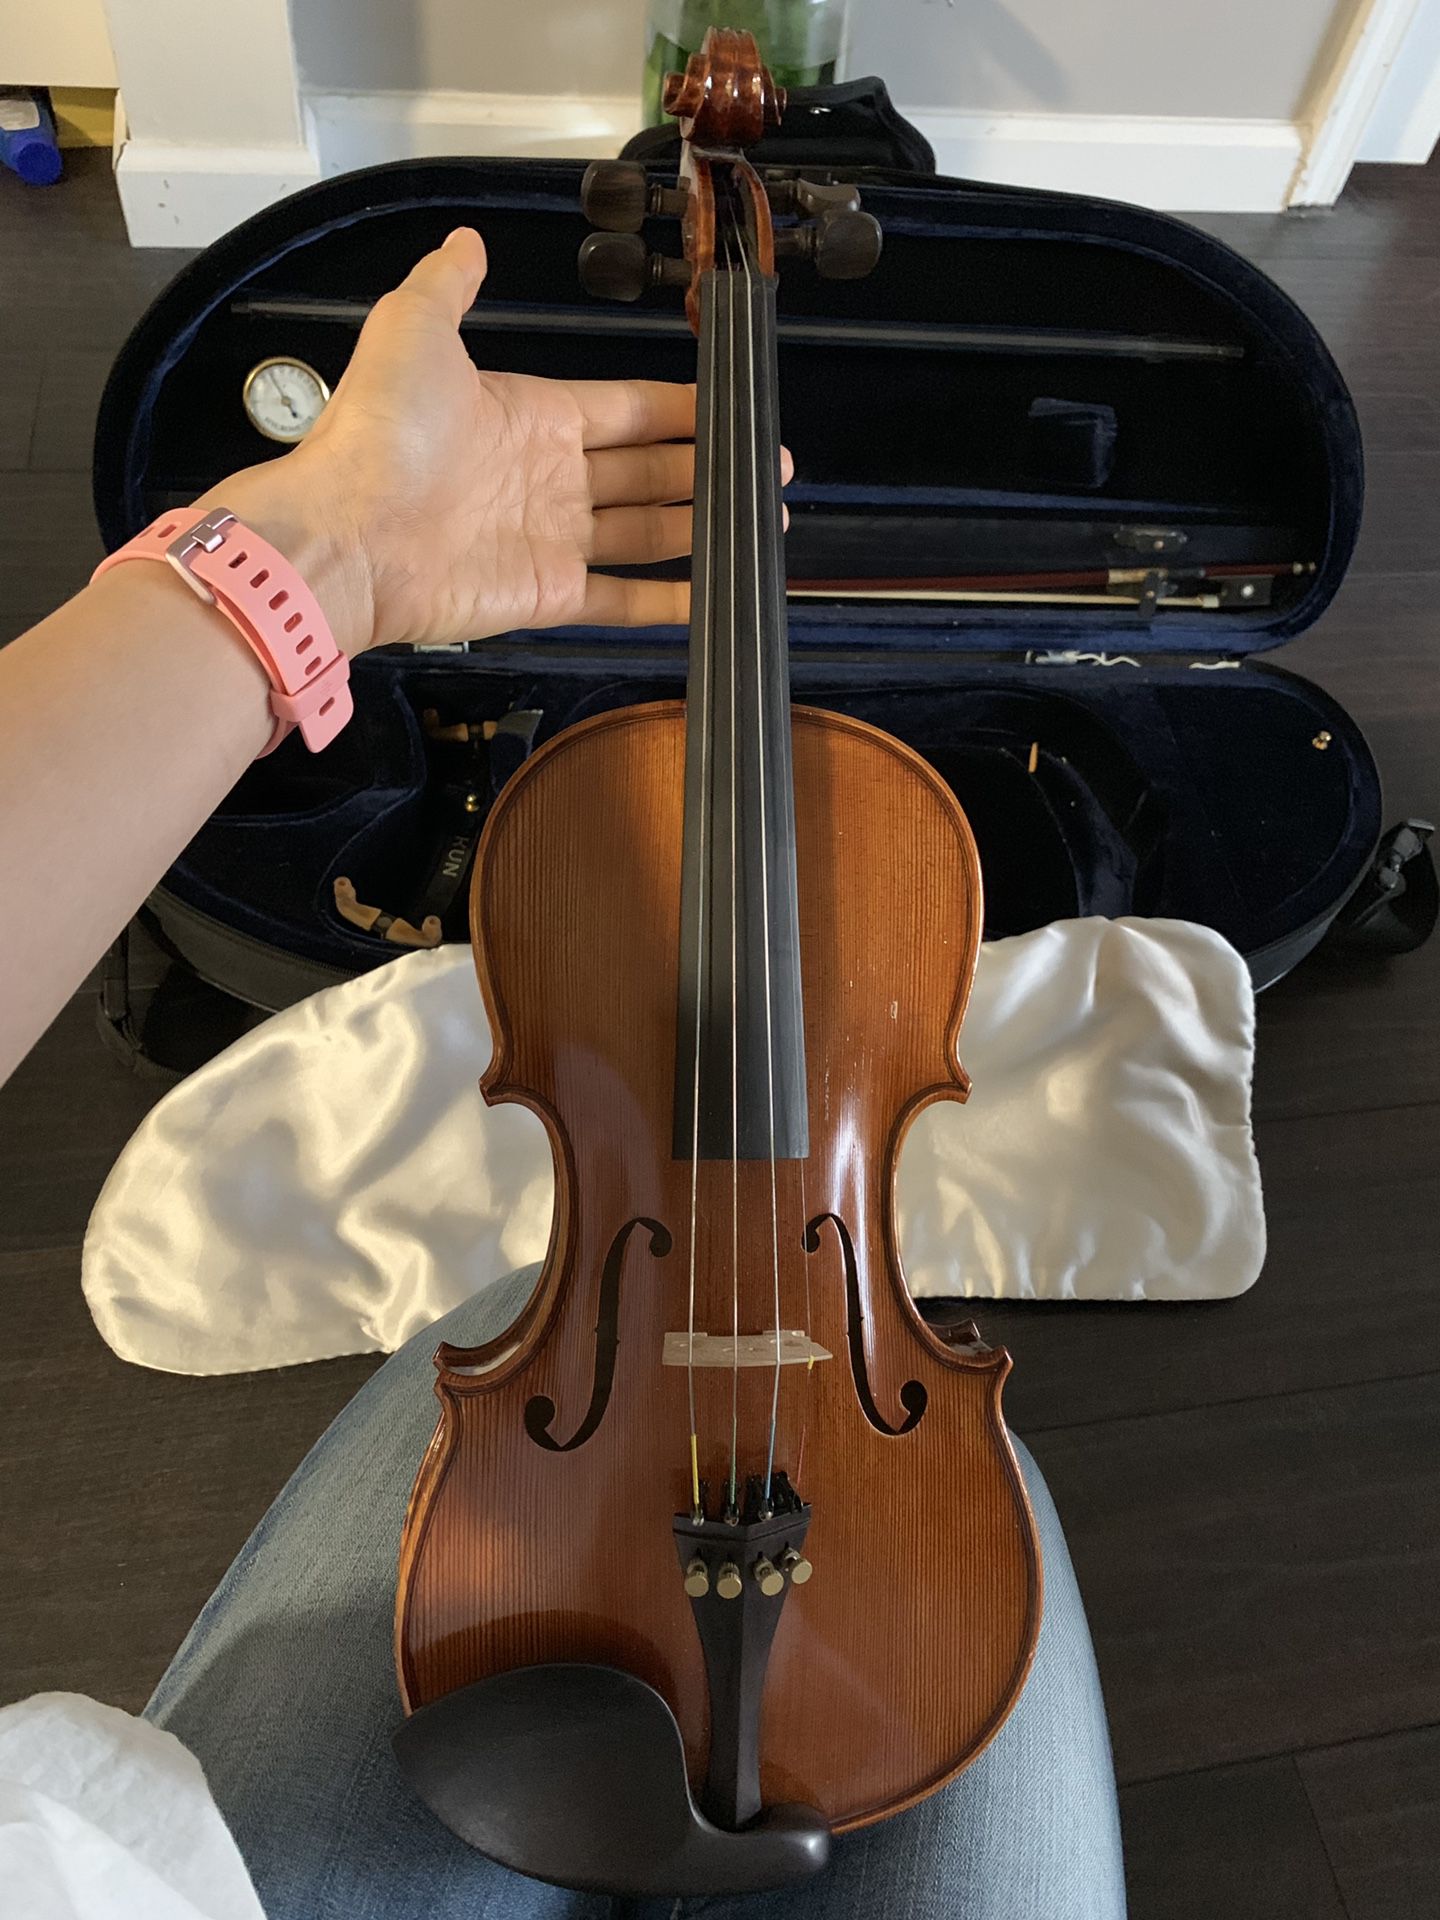 Mid 90’s Chinese made violin